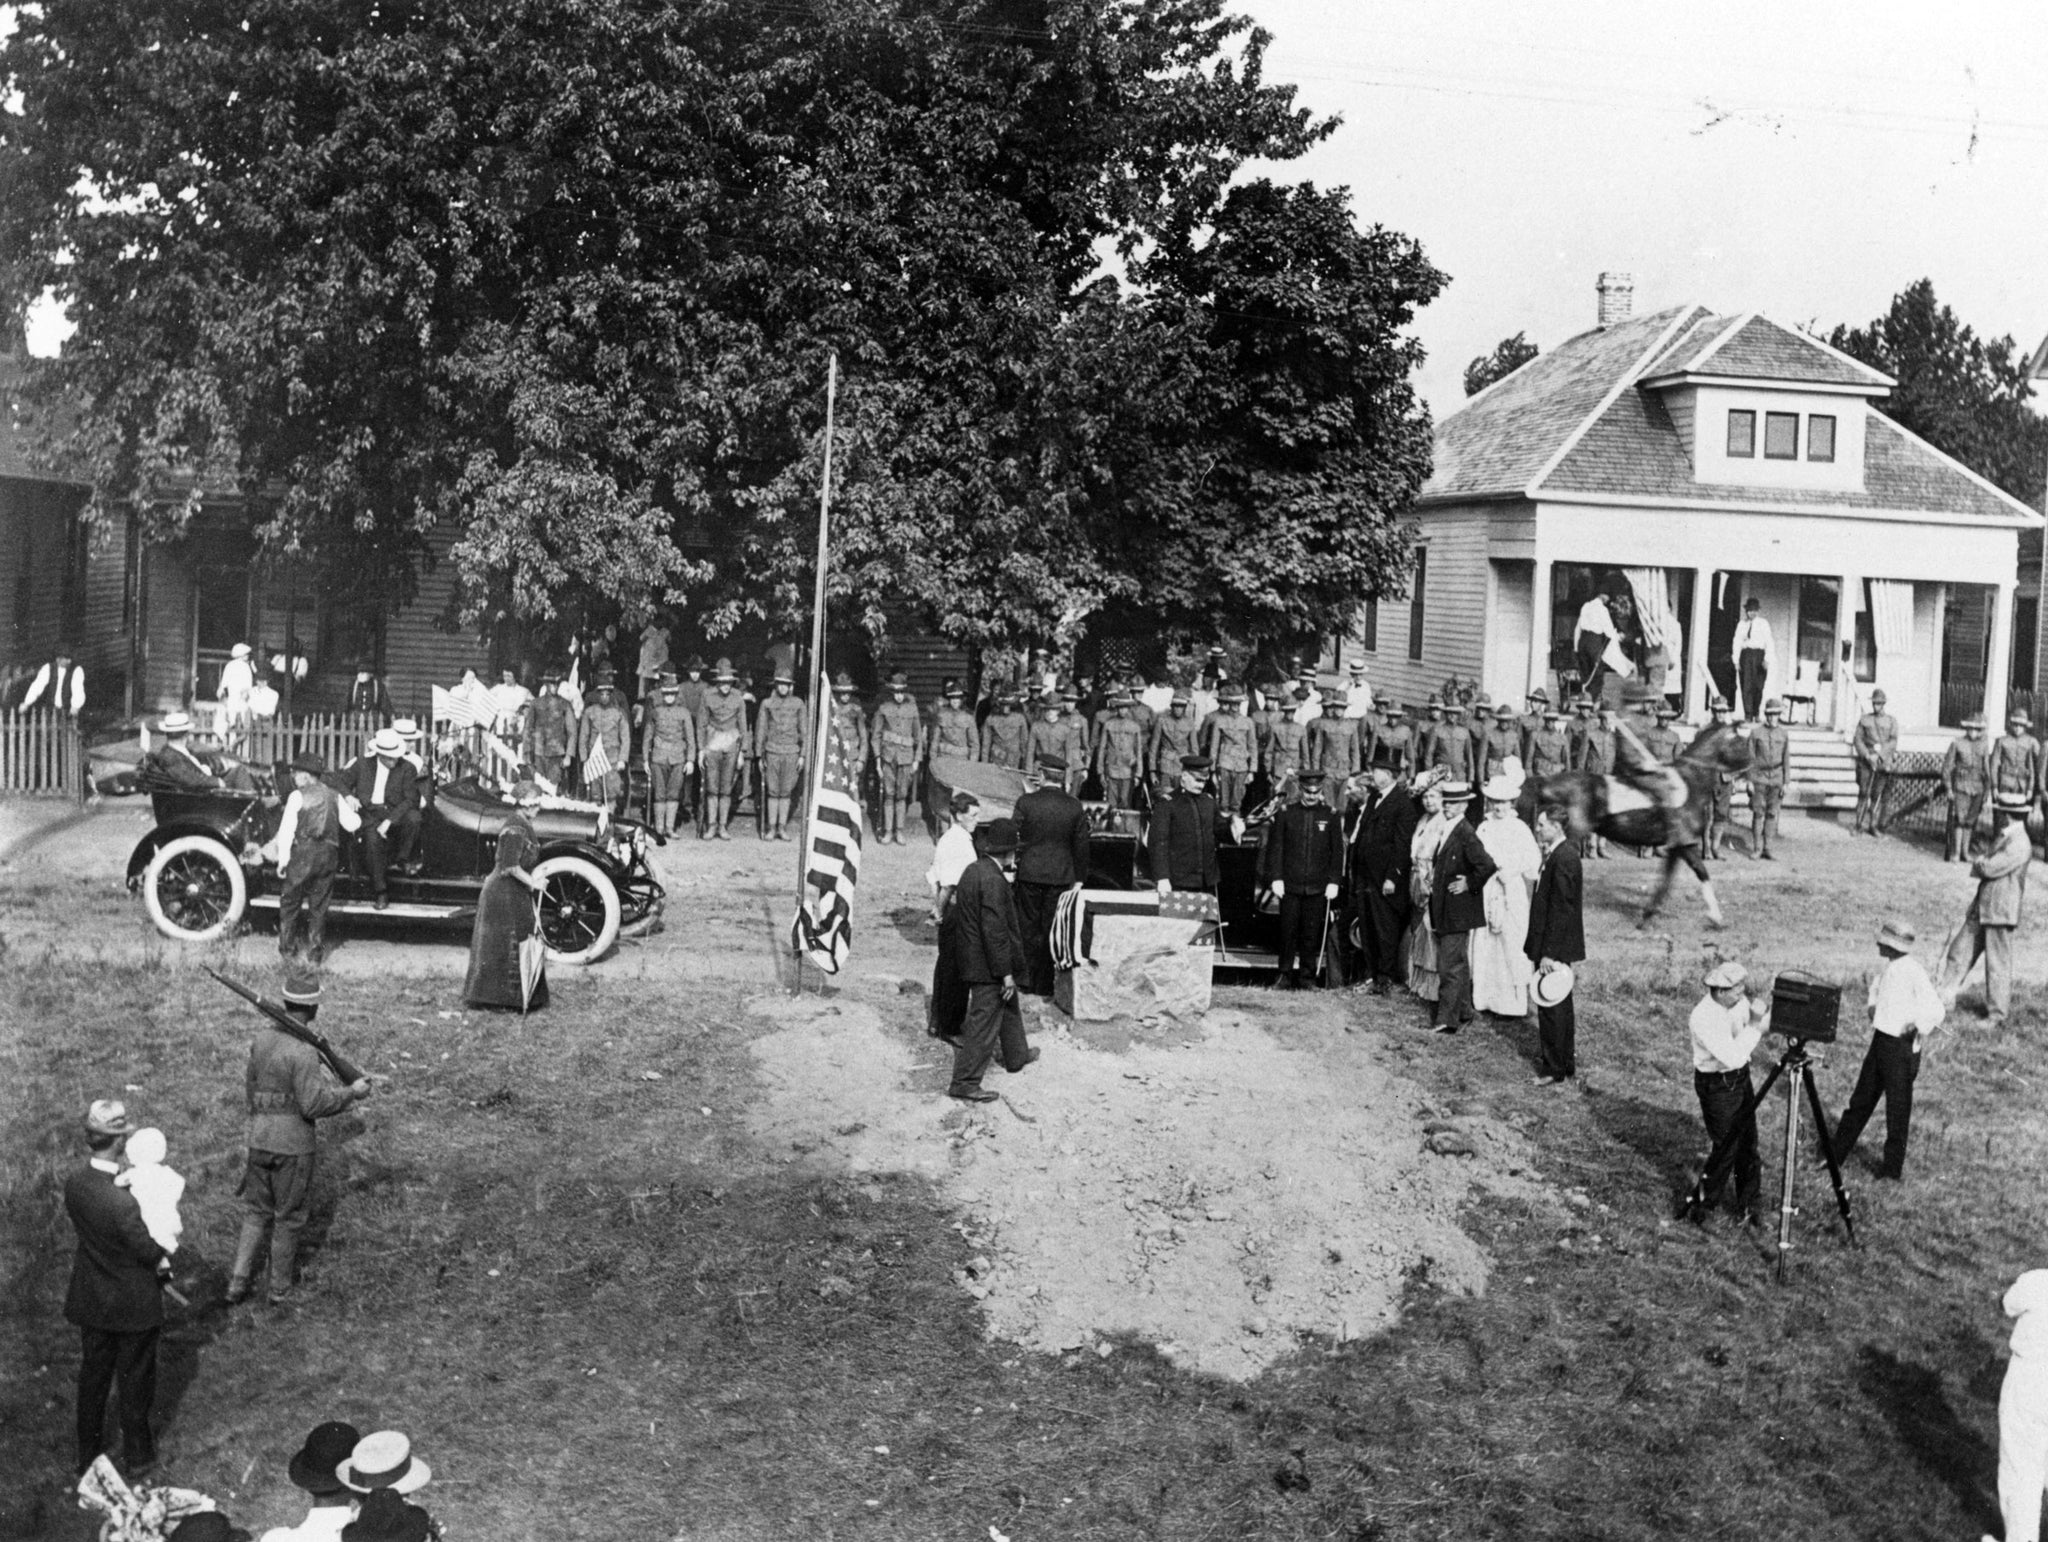 The arrival of Governor Dunn for the Logan Day festivities, August 3, 1914. This took place at General John A. Logan’s birthplace in Murphysboro. -- Courtesy Jackson County Historical Society / #1008